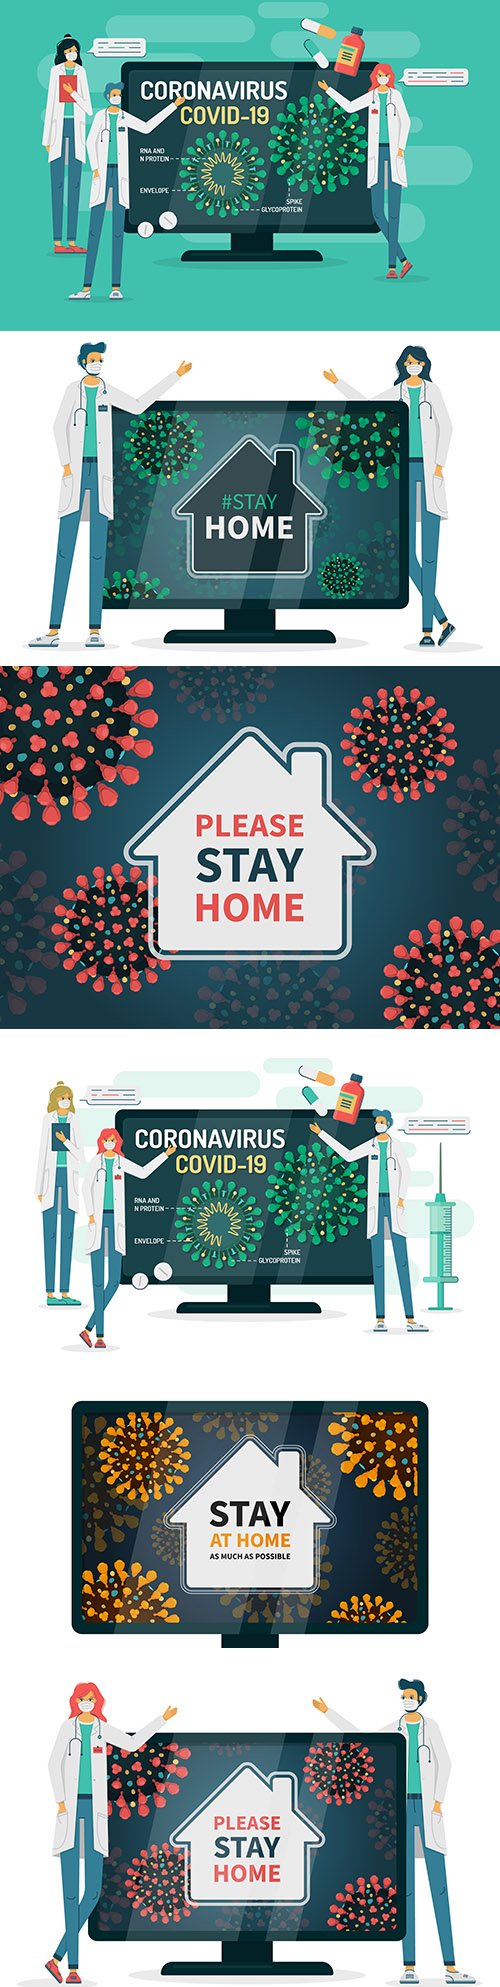 Doctors ask to stay at home due to coronavirus infection